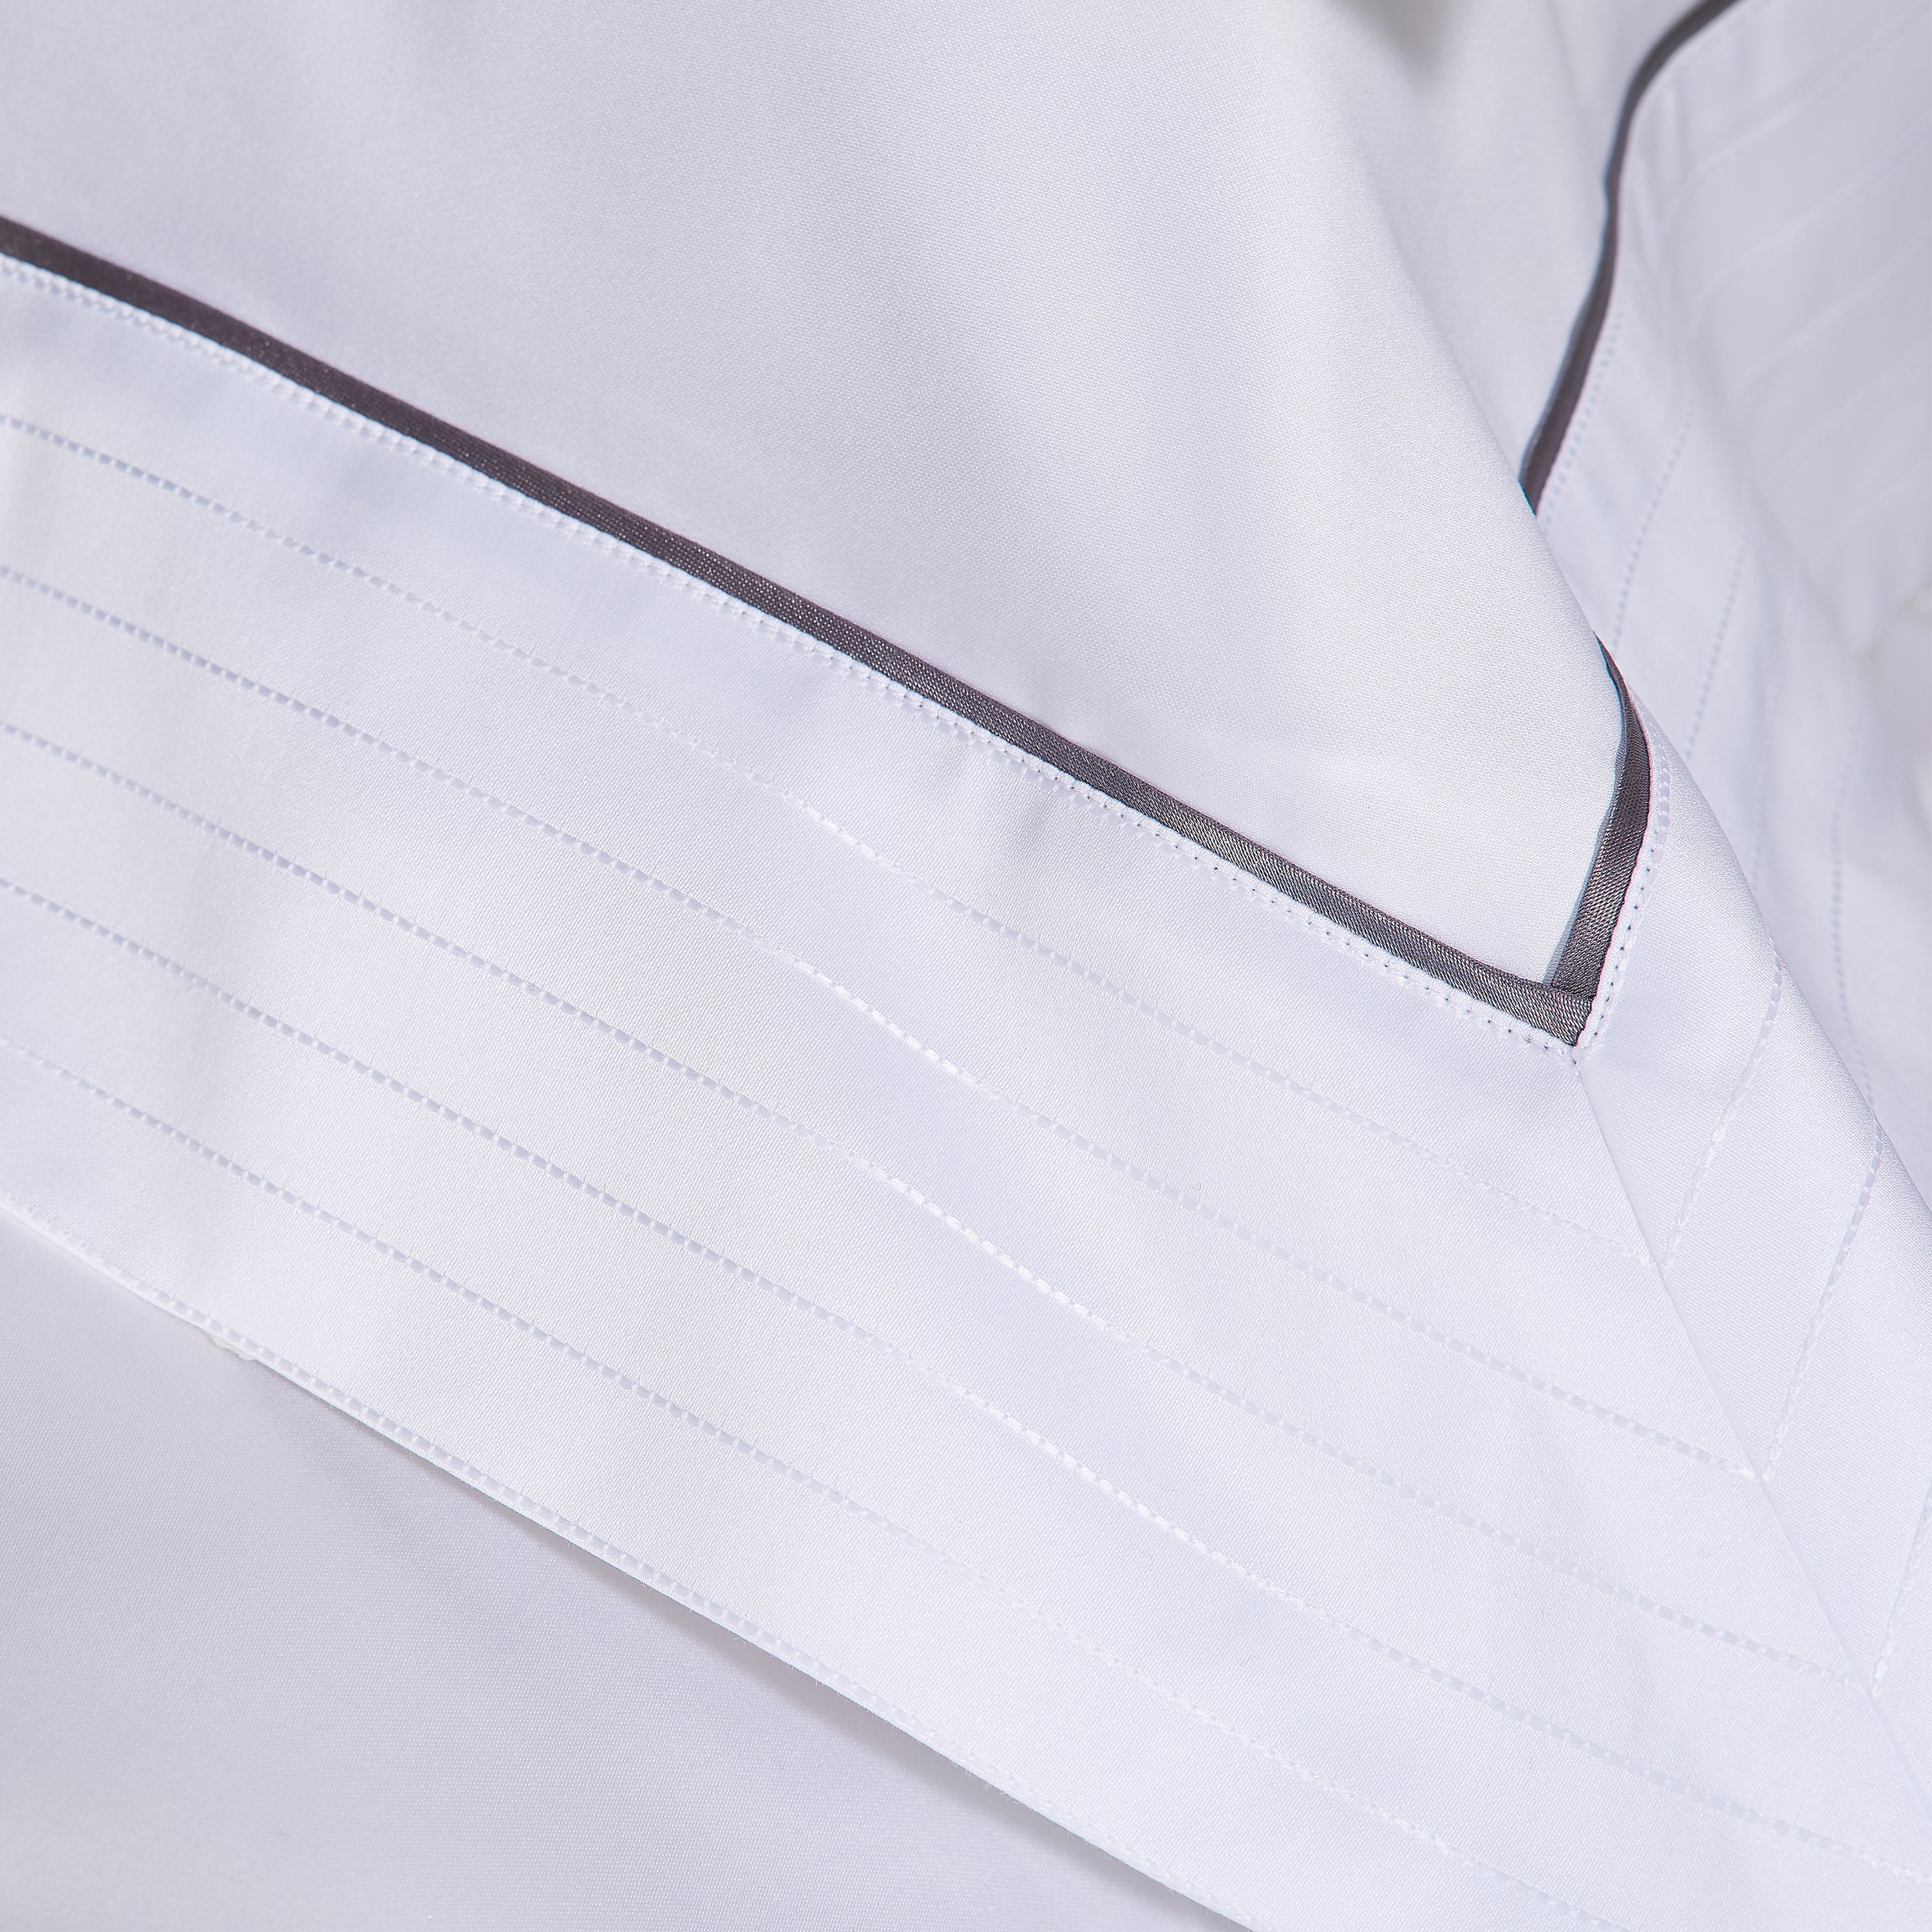 Heirlooms luxurious Sandringham cotton sateen white bedroom duvet cover and sheets set with a contrast border whose subtle self colour woven stich adds shine to your lines.